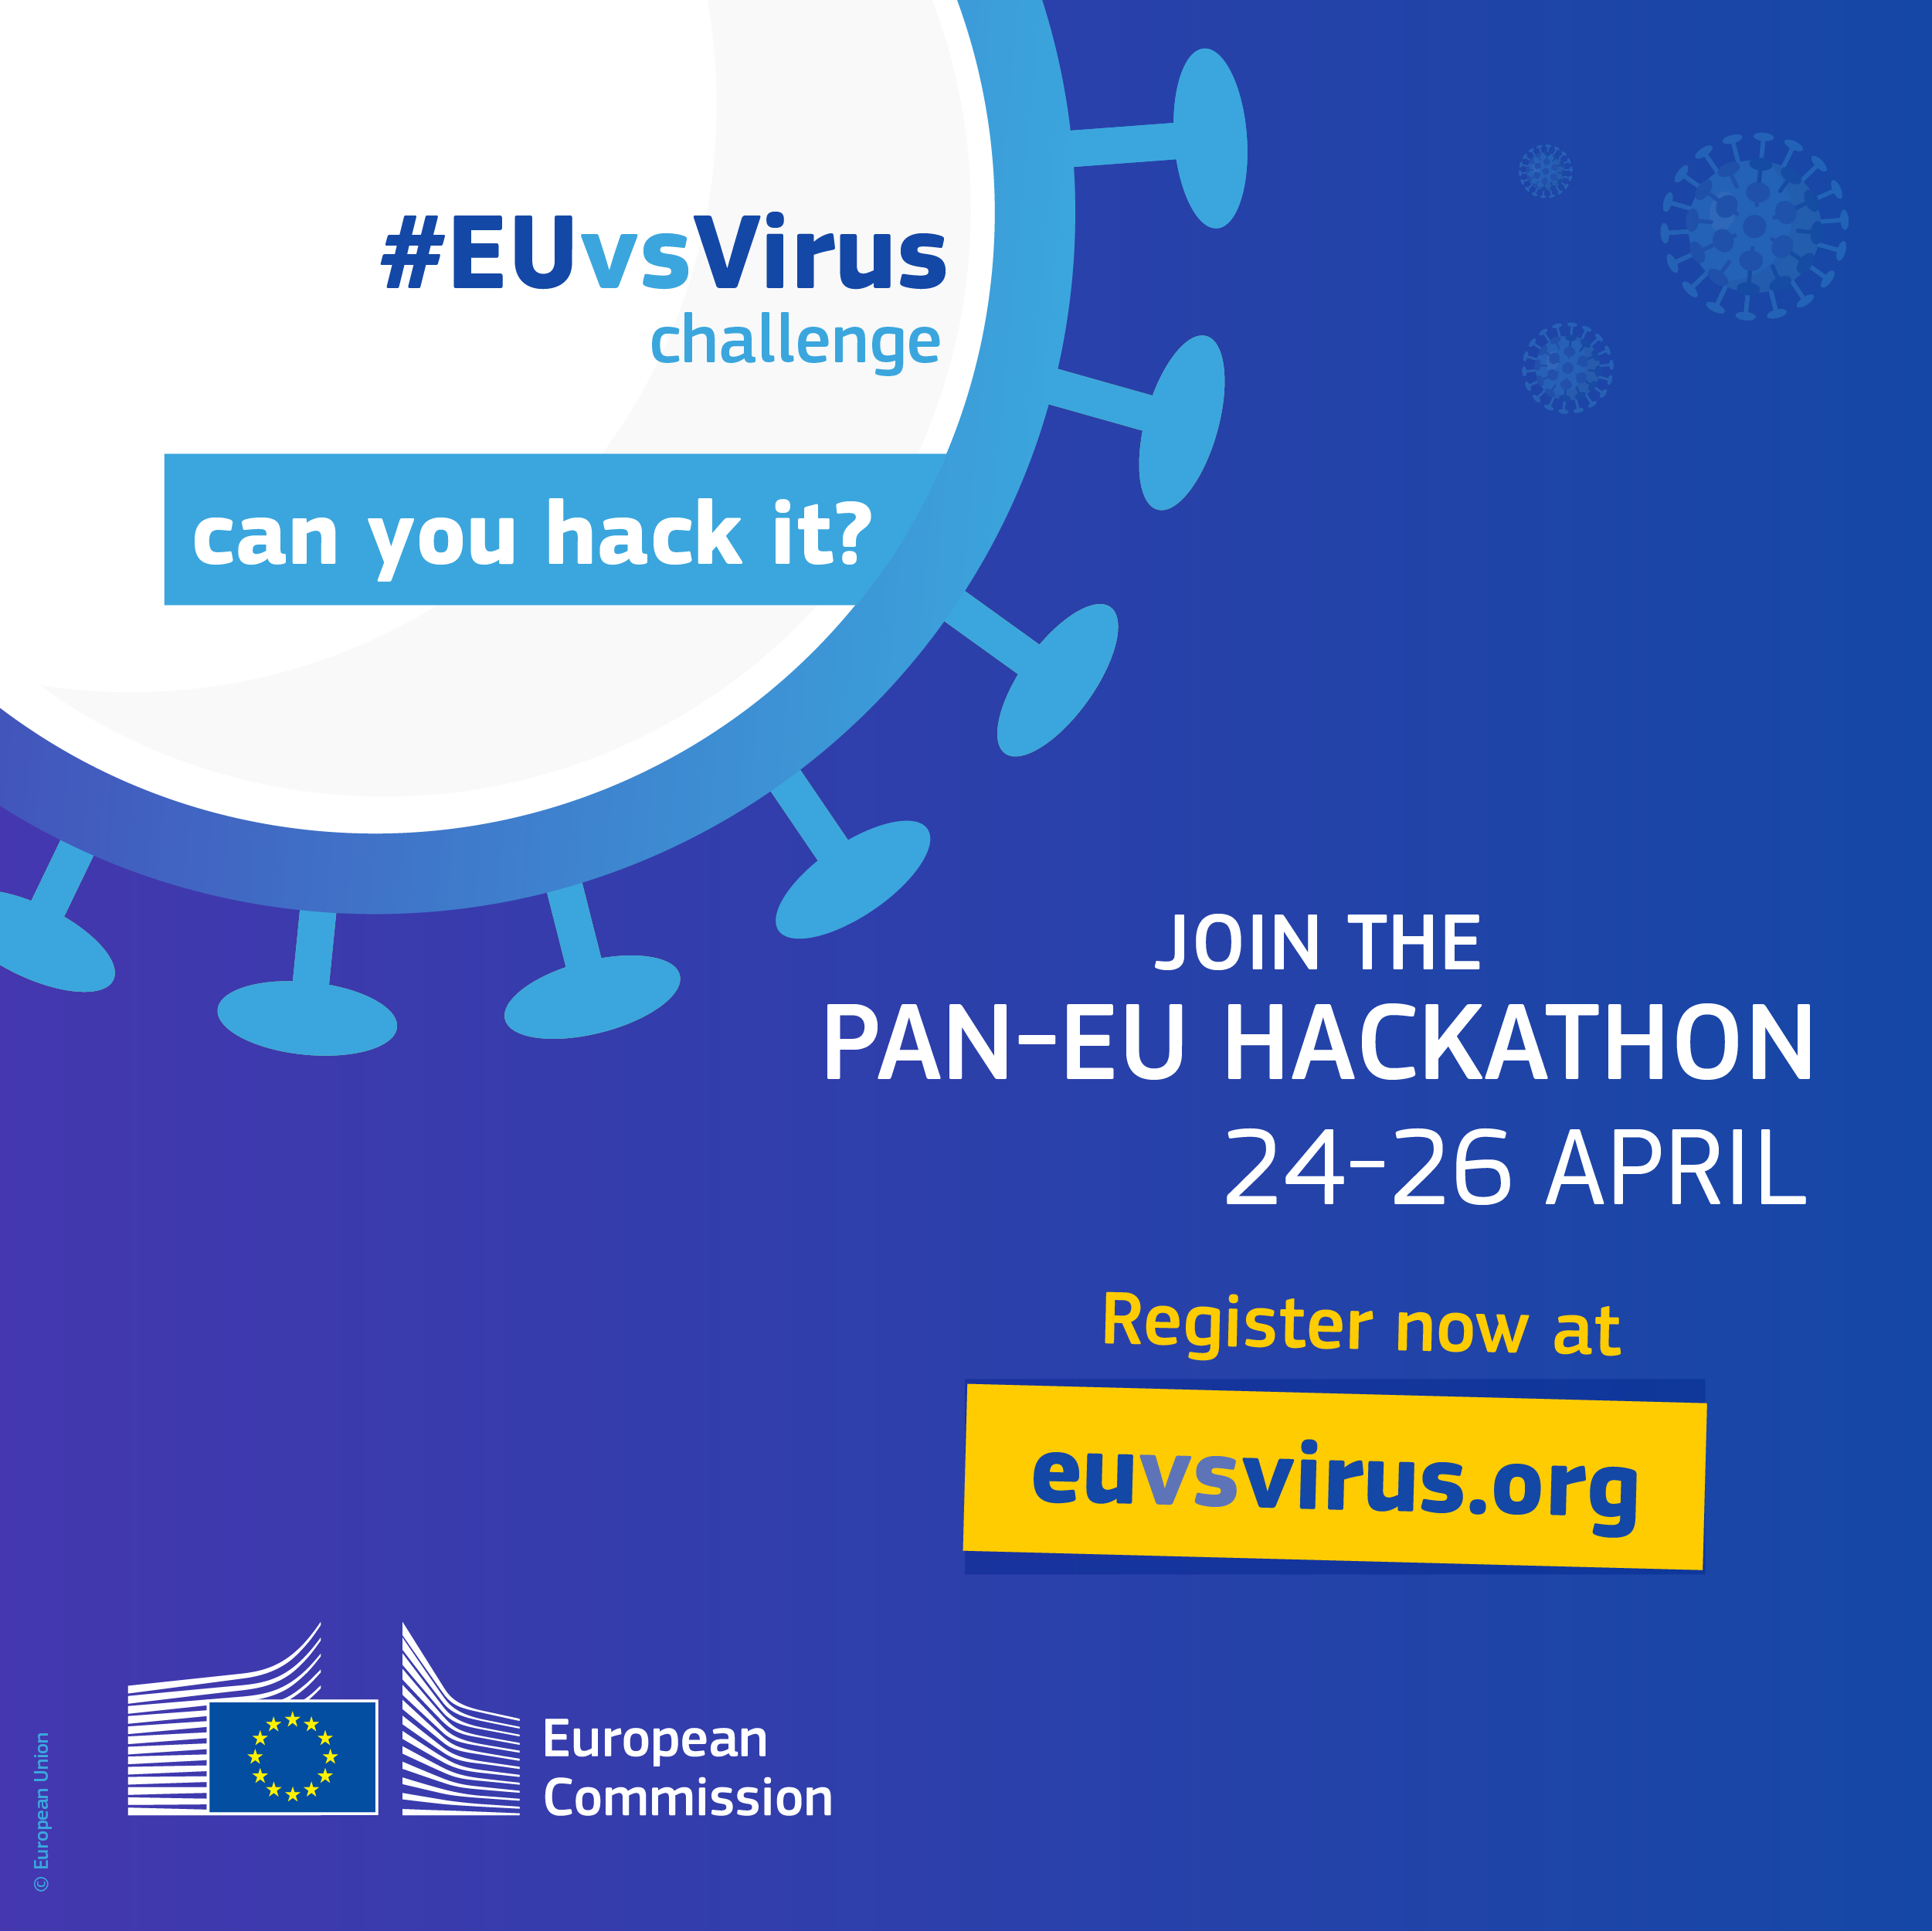 Pan-European Hackathon to develop innovative solutions to overcome societal challenges related to coronavirus